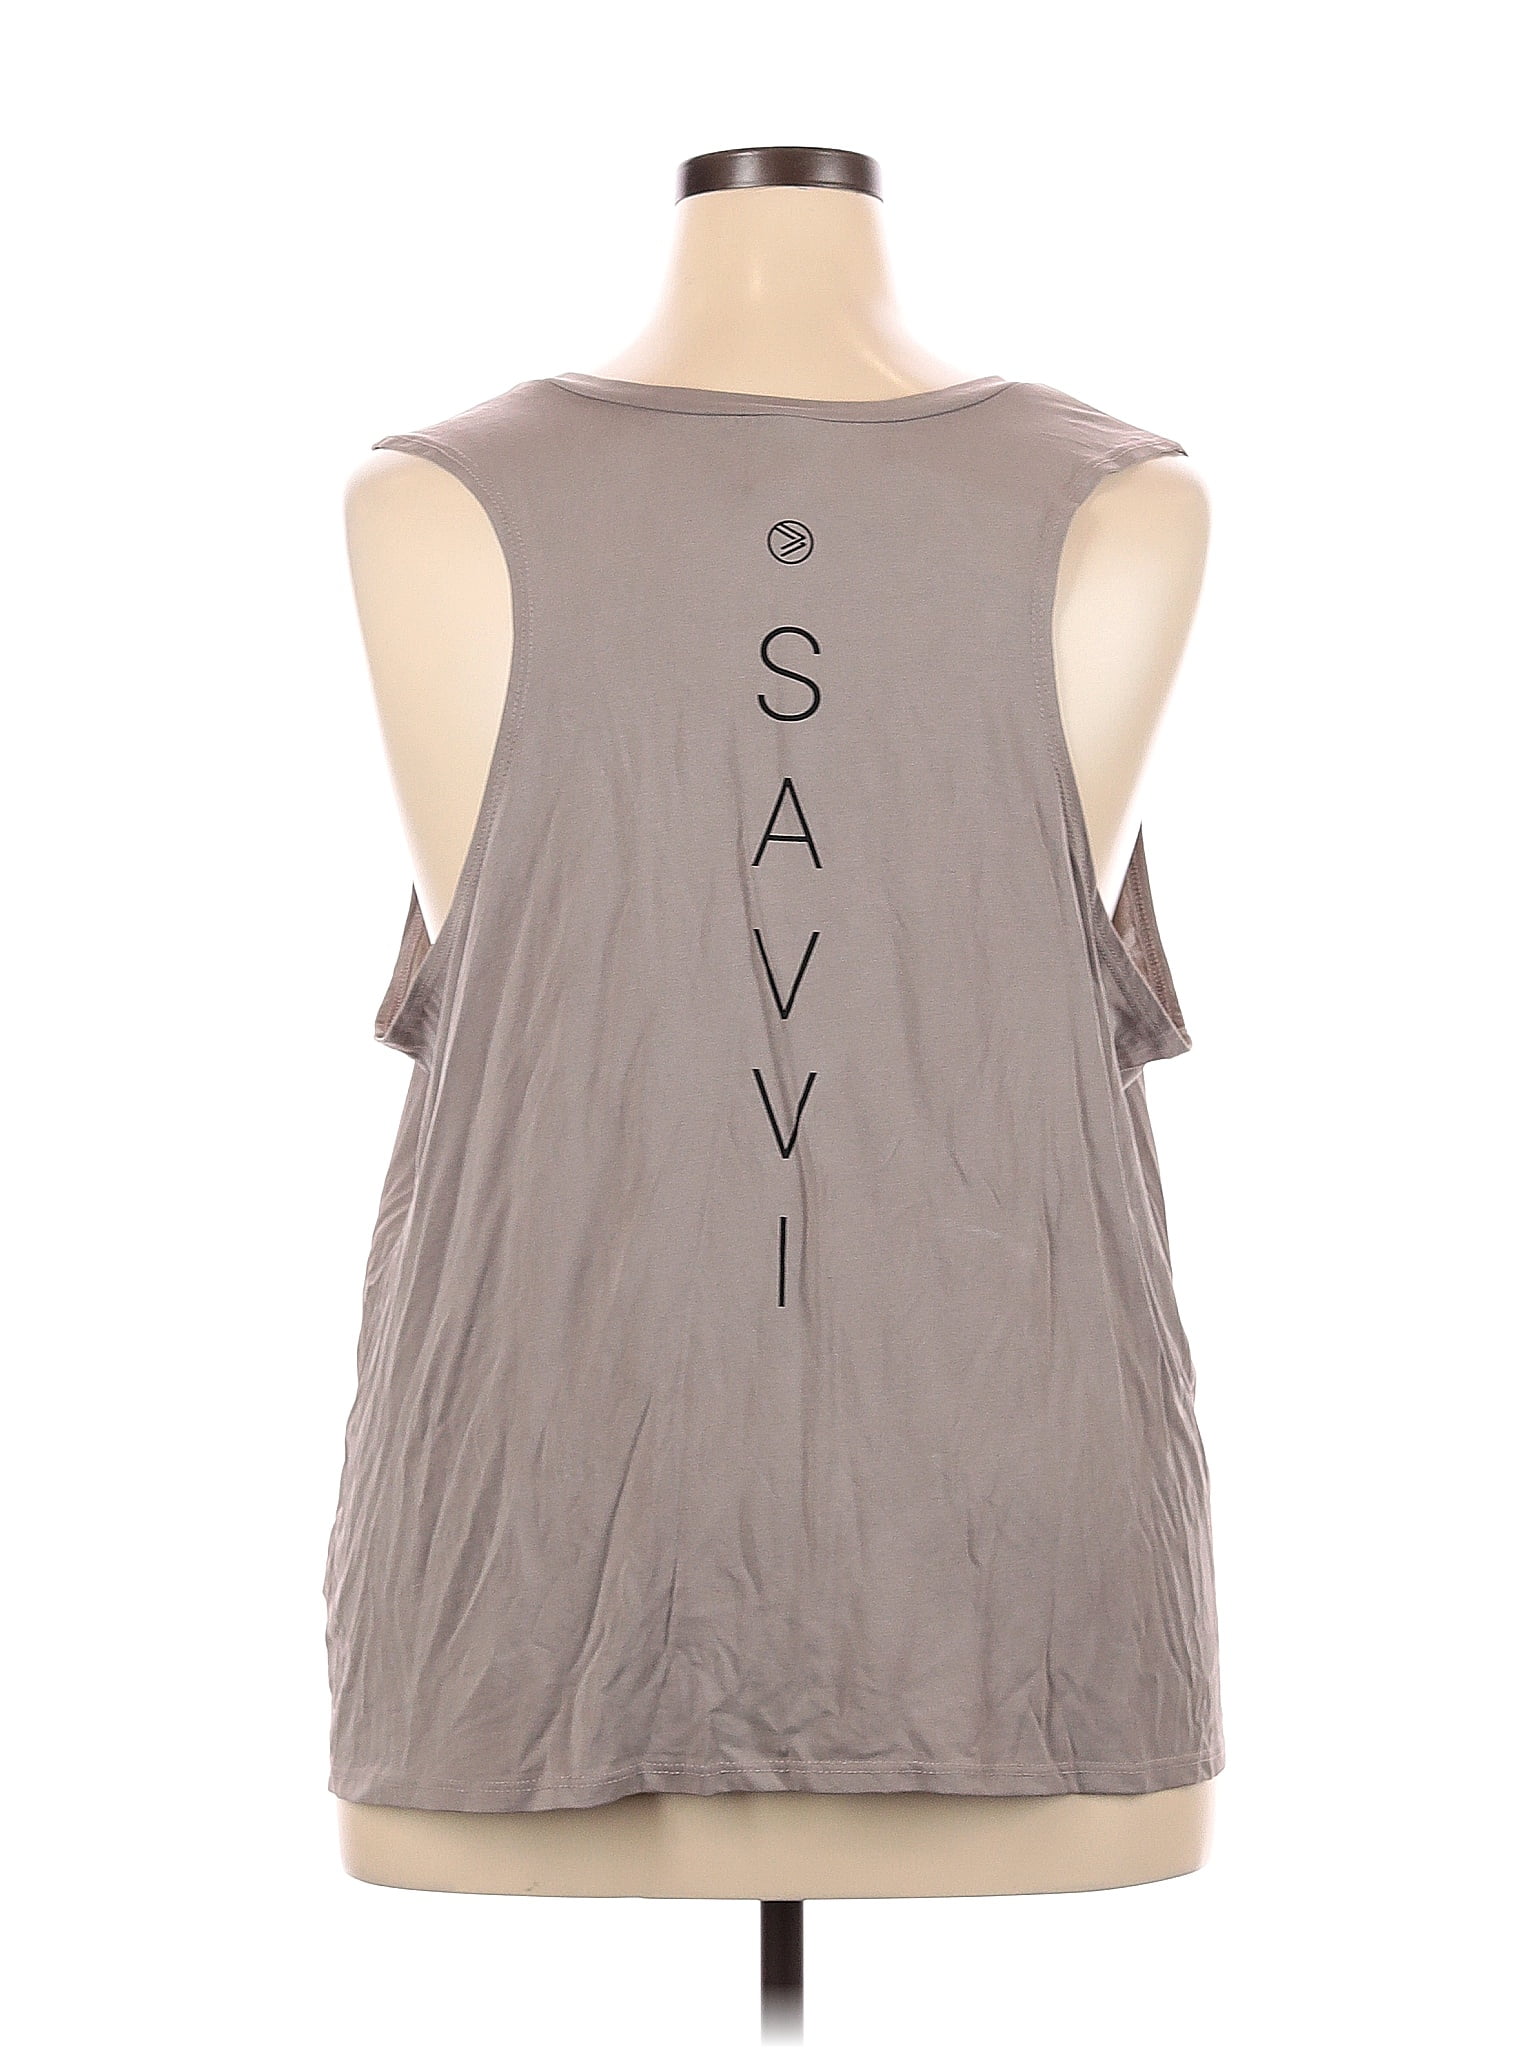 Savvi Fit Women's Activewear On Sale Up To 90% Off Retail